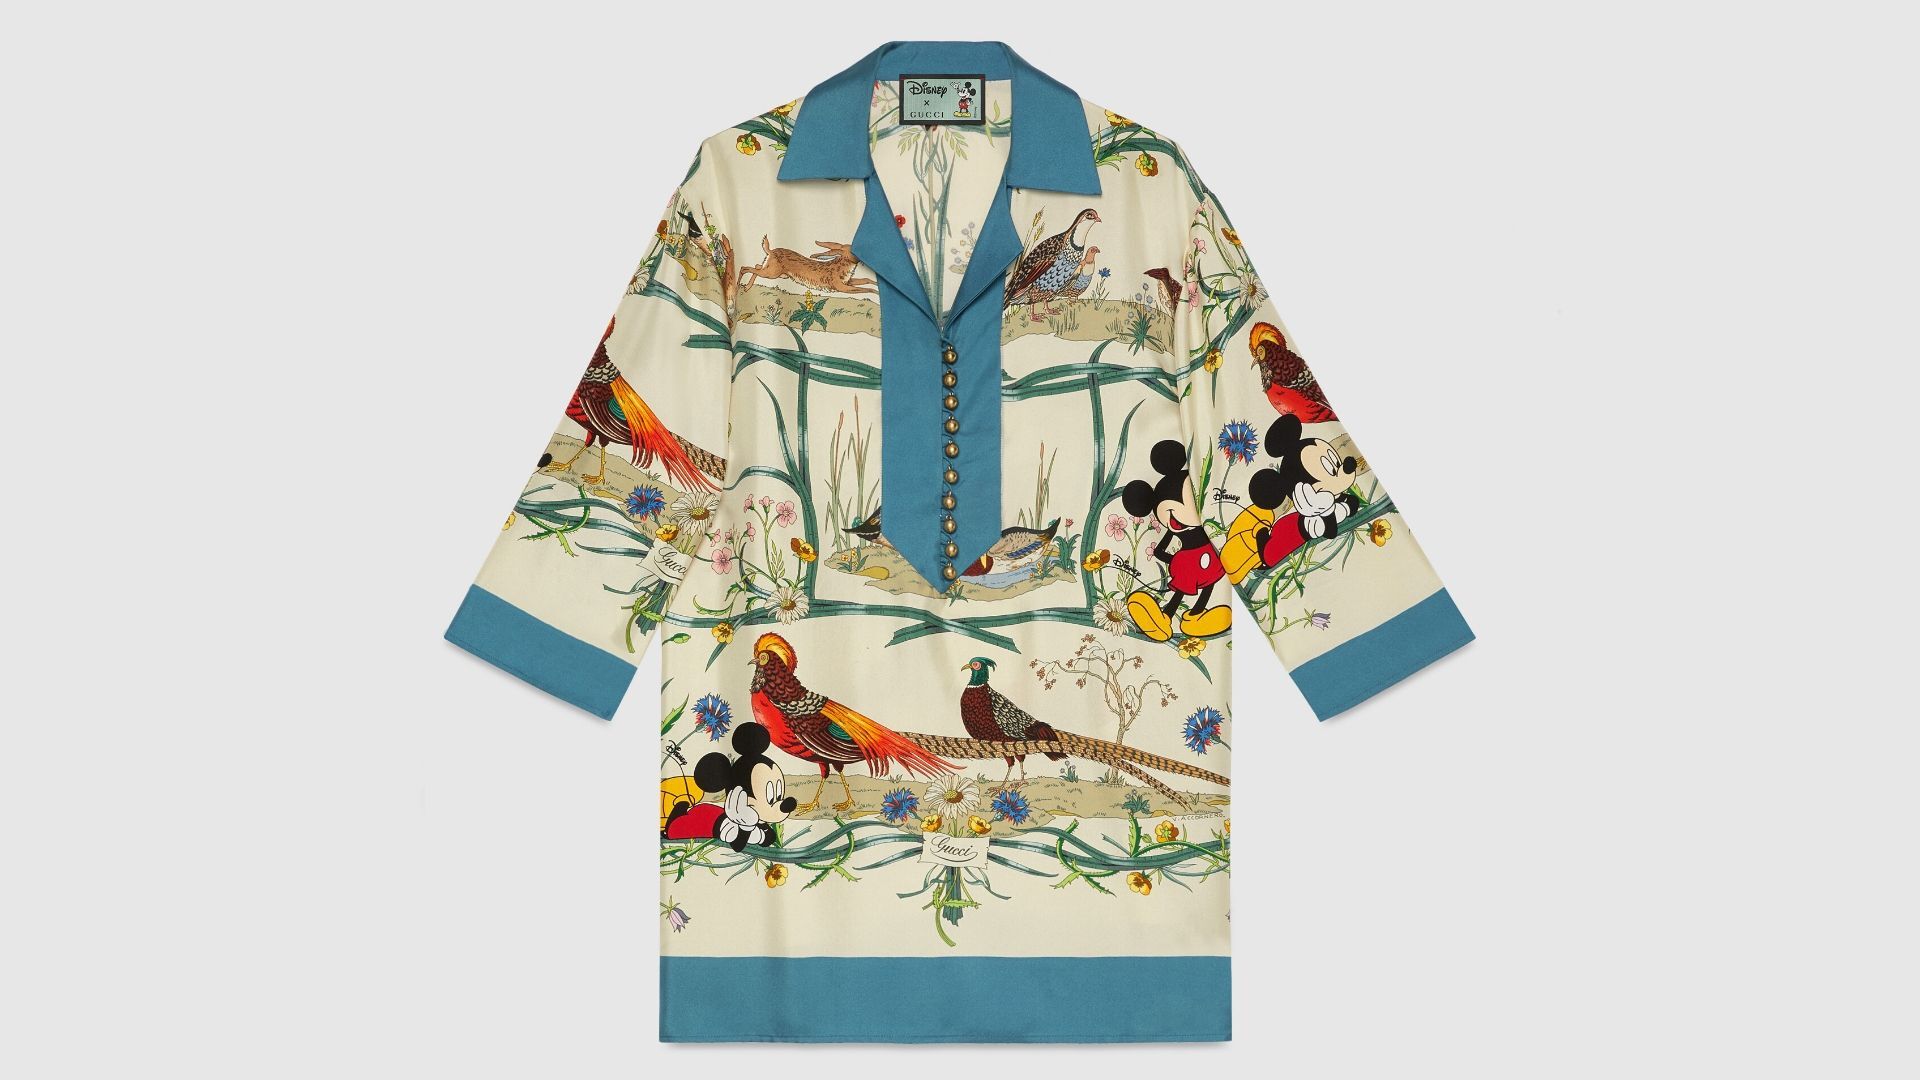 5 Of The Best Pieces From The Disney X Gucci Collection